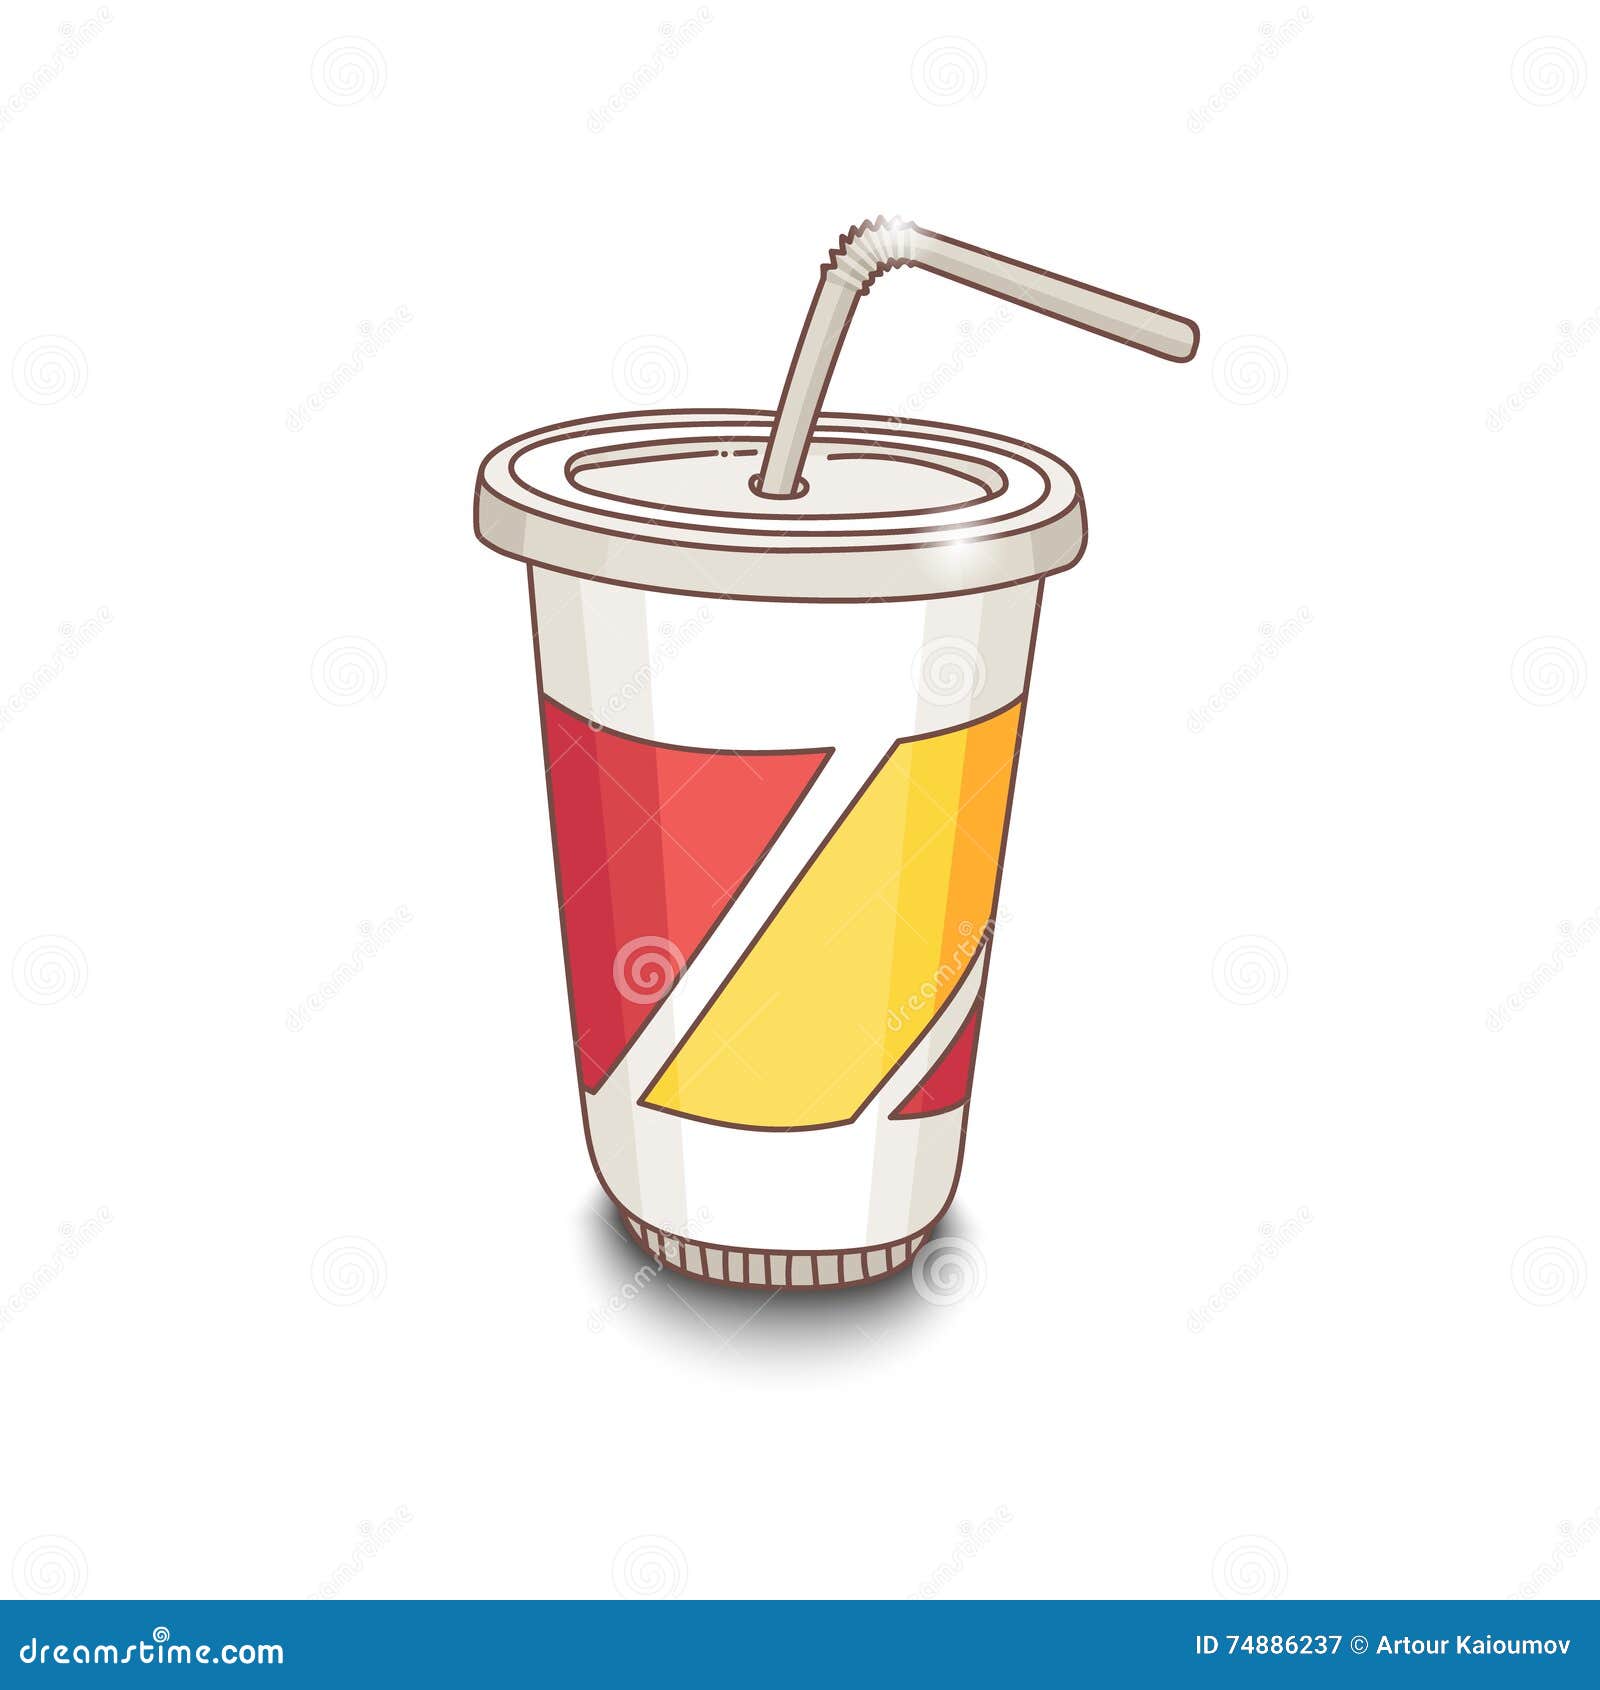 https://thumbs.dreamstime.com/z/cute-hand-drawn-cartoon-style-cup-drink-shadow-white-background-eps-74886237.jpg